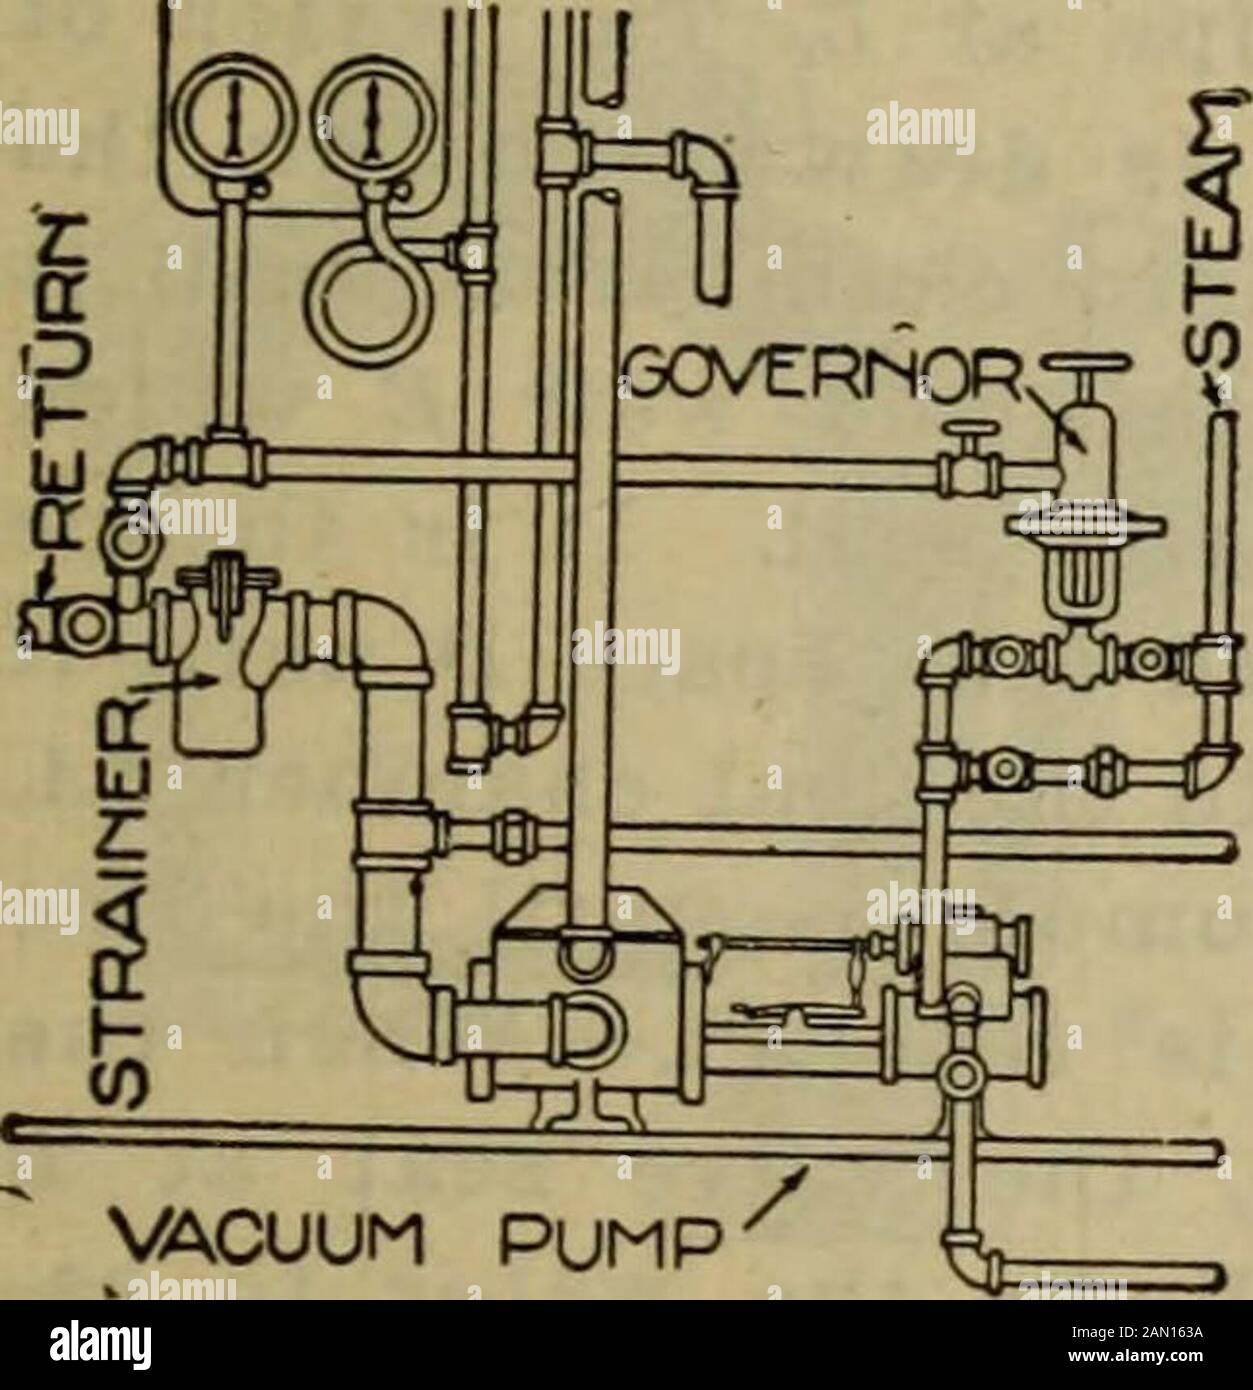 Handbook for heating and ventilating engineers . e return linenext the pump. This fitting usually has a cold water con-nection to be used at times to assist in producing a moreperfect vacuum. The piping system for the automatic con-trol of the vacuum] pump is shown in Fig. 78. It will be seen that the vacuum in the re-turn operates through the gover-nor to regulate the steam supplyto the pump cylinder, thus con-trolling the speed of the pump.Occasionally it is desirable tohave certain parts of the heatingsystem under a different vacuum.An Illustration of this would bewhere the radiators within Stock Photo